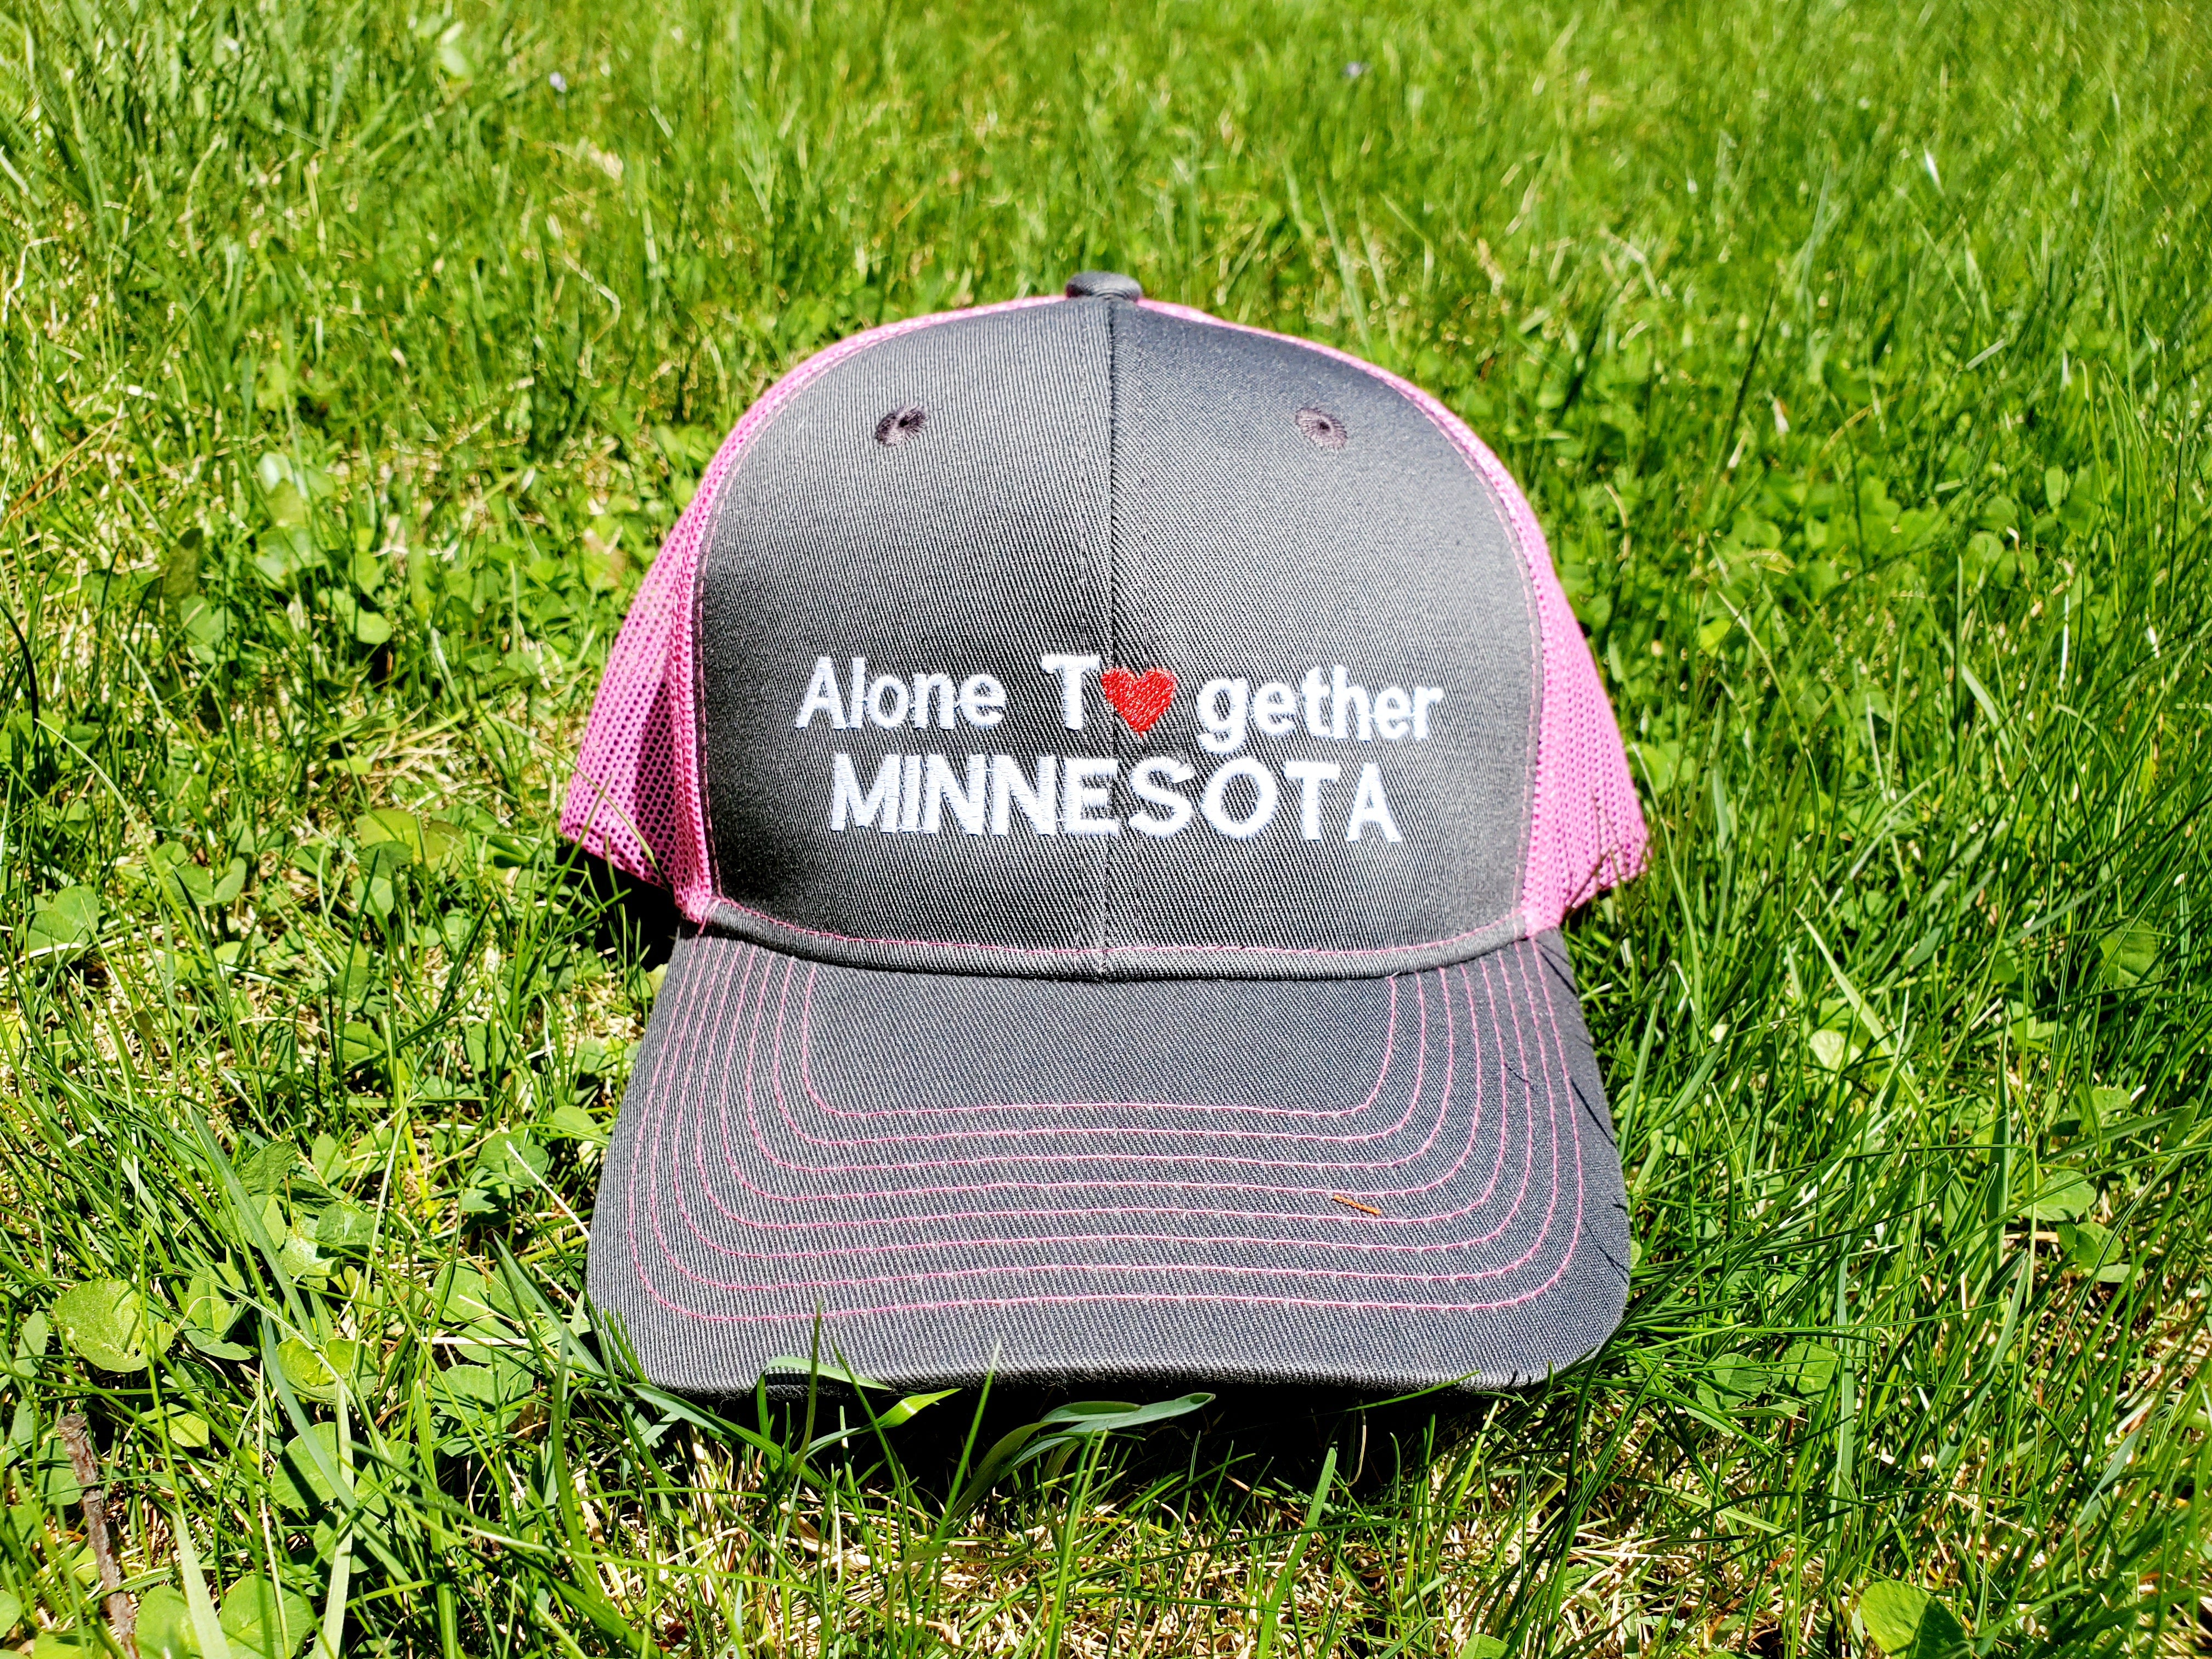 Alone Together Minnesota Embroidered Snap-back Trucker Cap hat